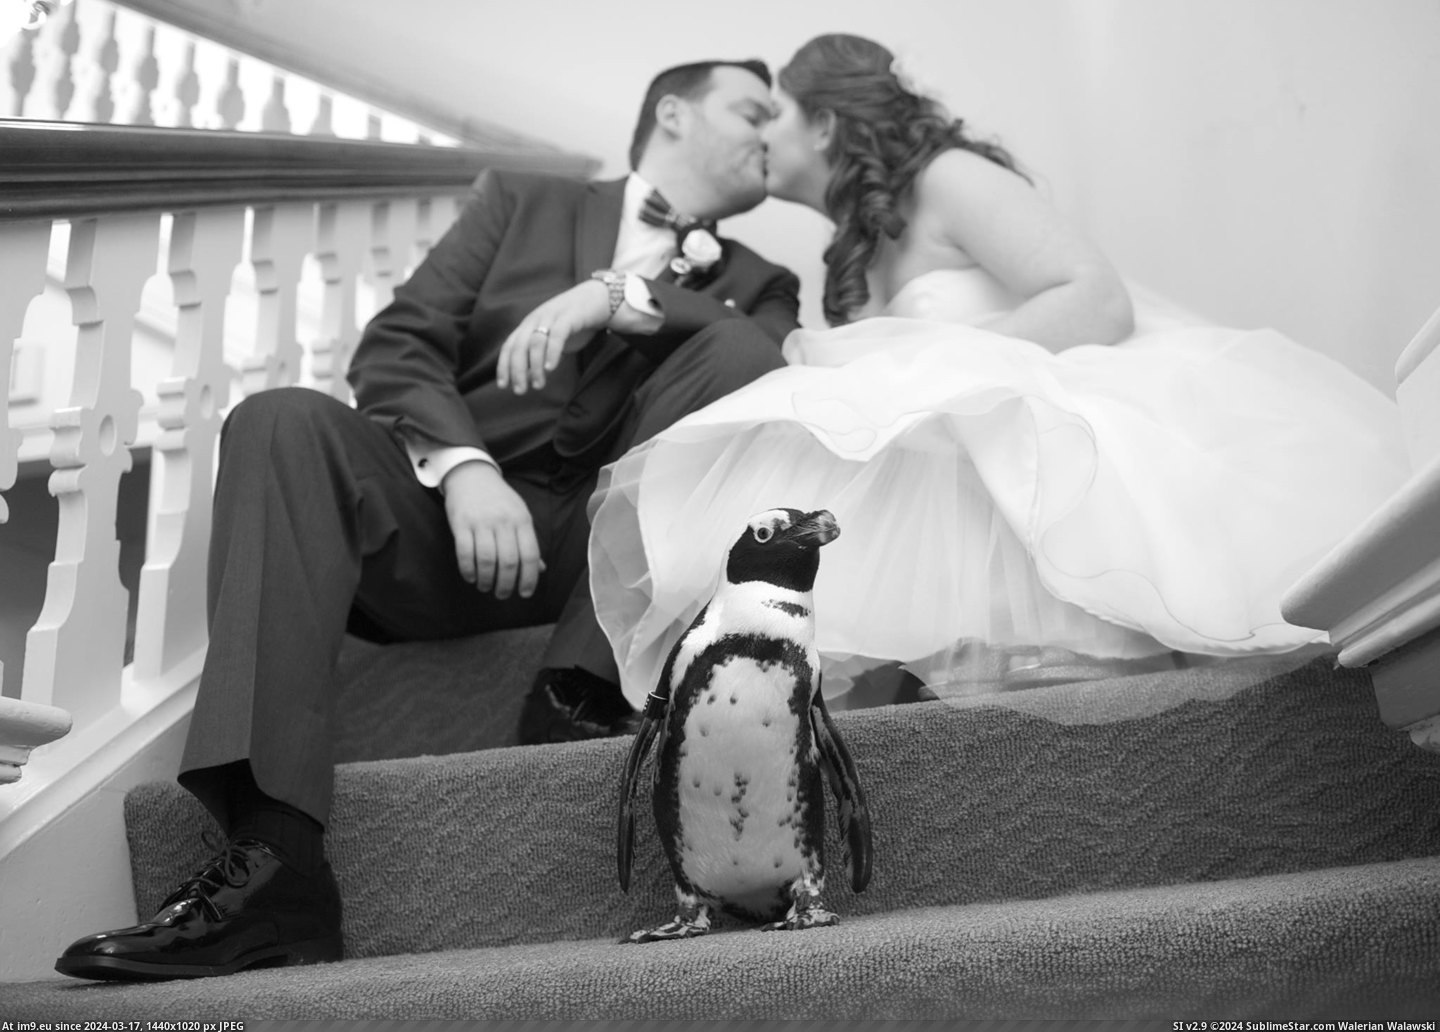 #For #Day #Picture #Wedding #Married #Penguin #Attended #Ago #Cake #Our [Aww] For my cake day, here is a picture of us and the PENGUIN that attended our wedding. We were married 10 days ago! Pic. (Image of album My r/AWW favs))